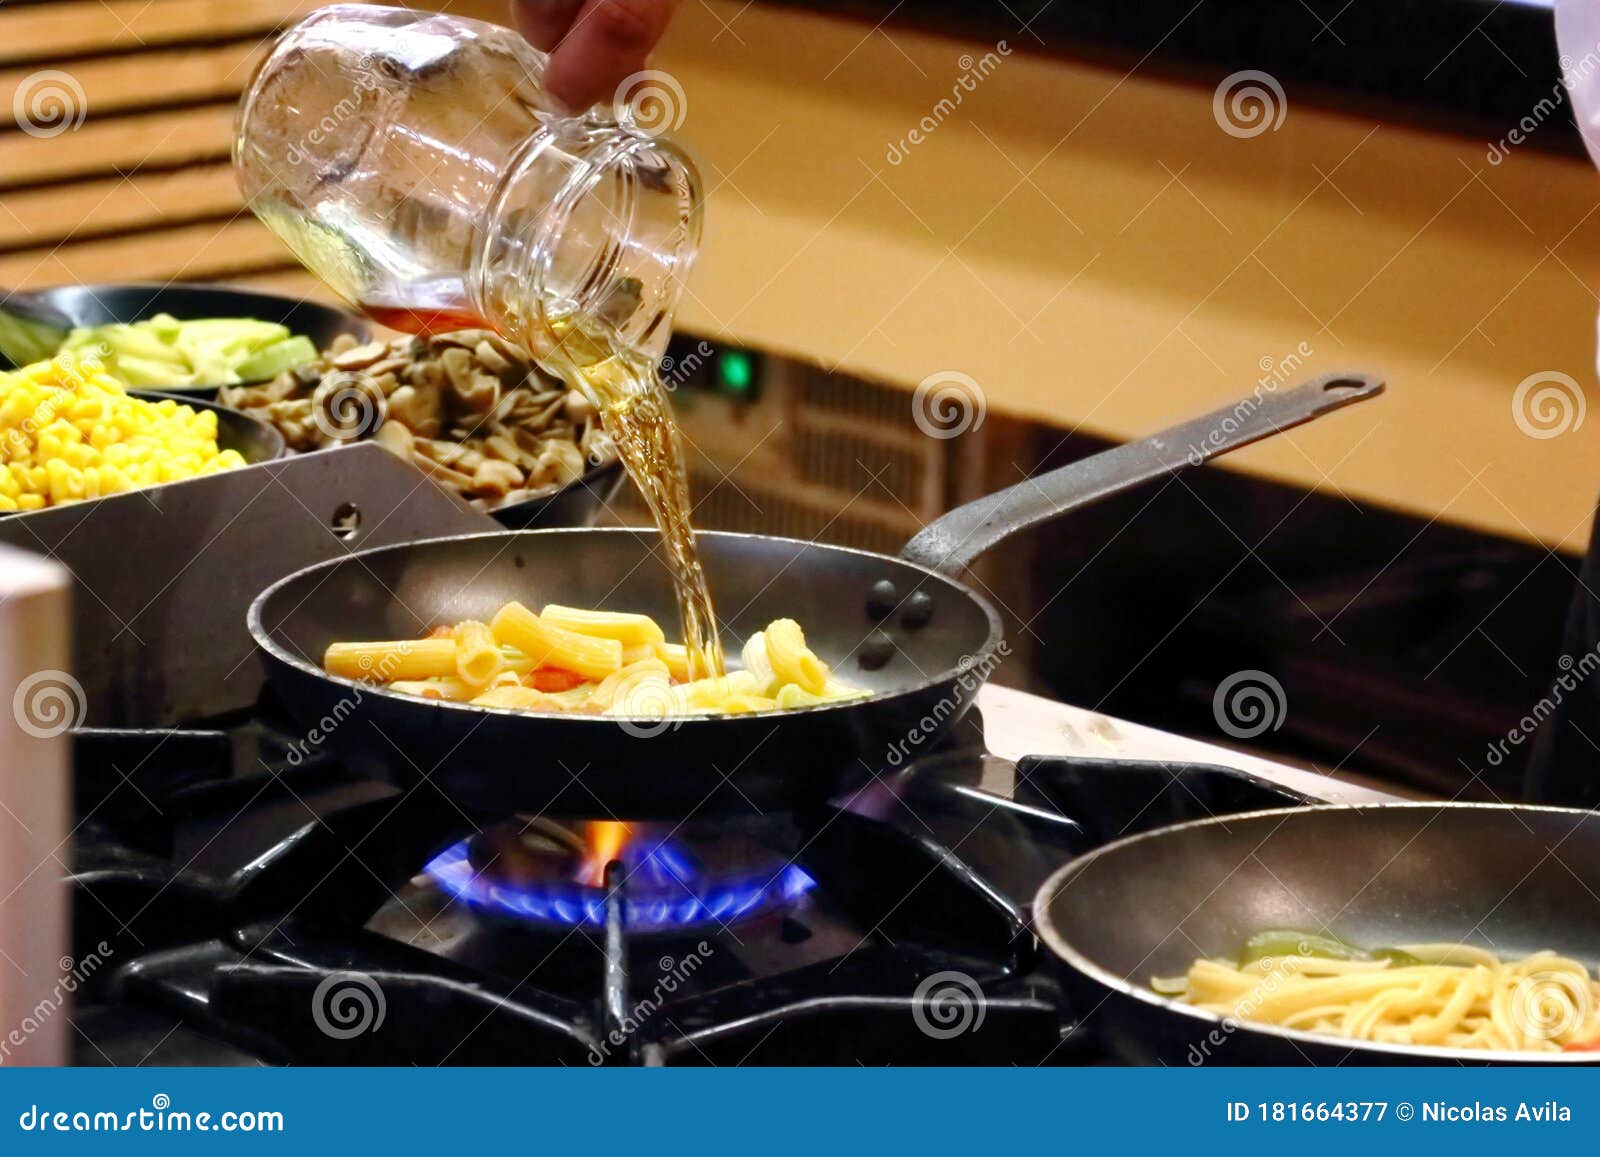 cook pouring sauce from a jug into a bowl with pasta